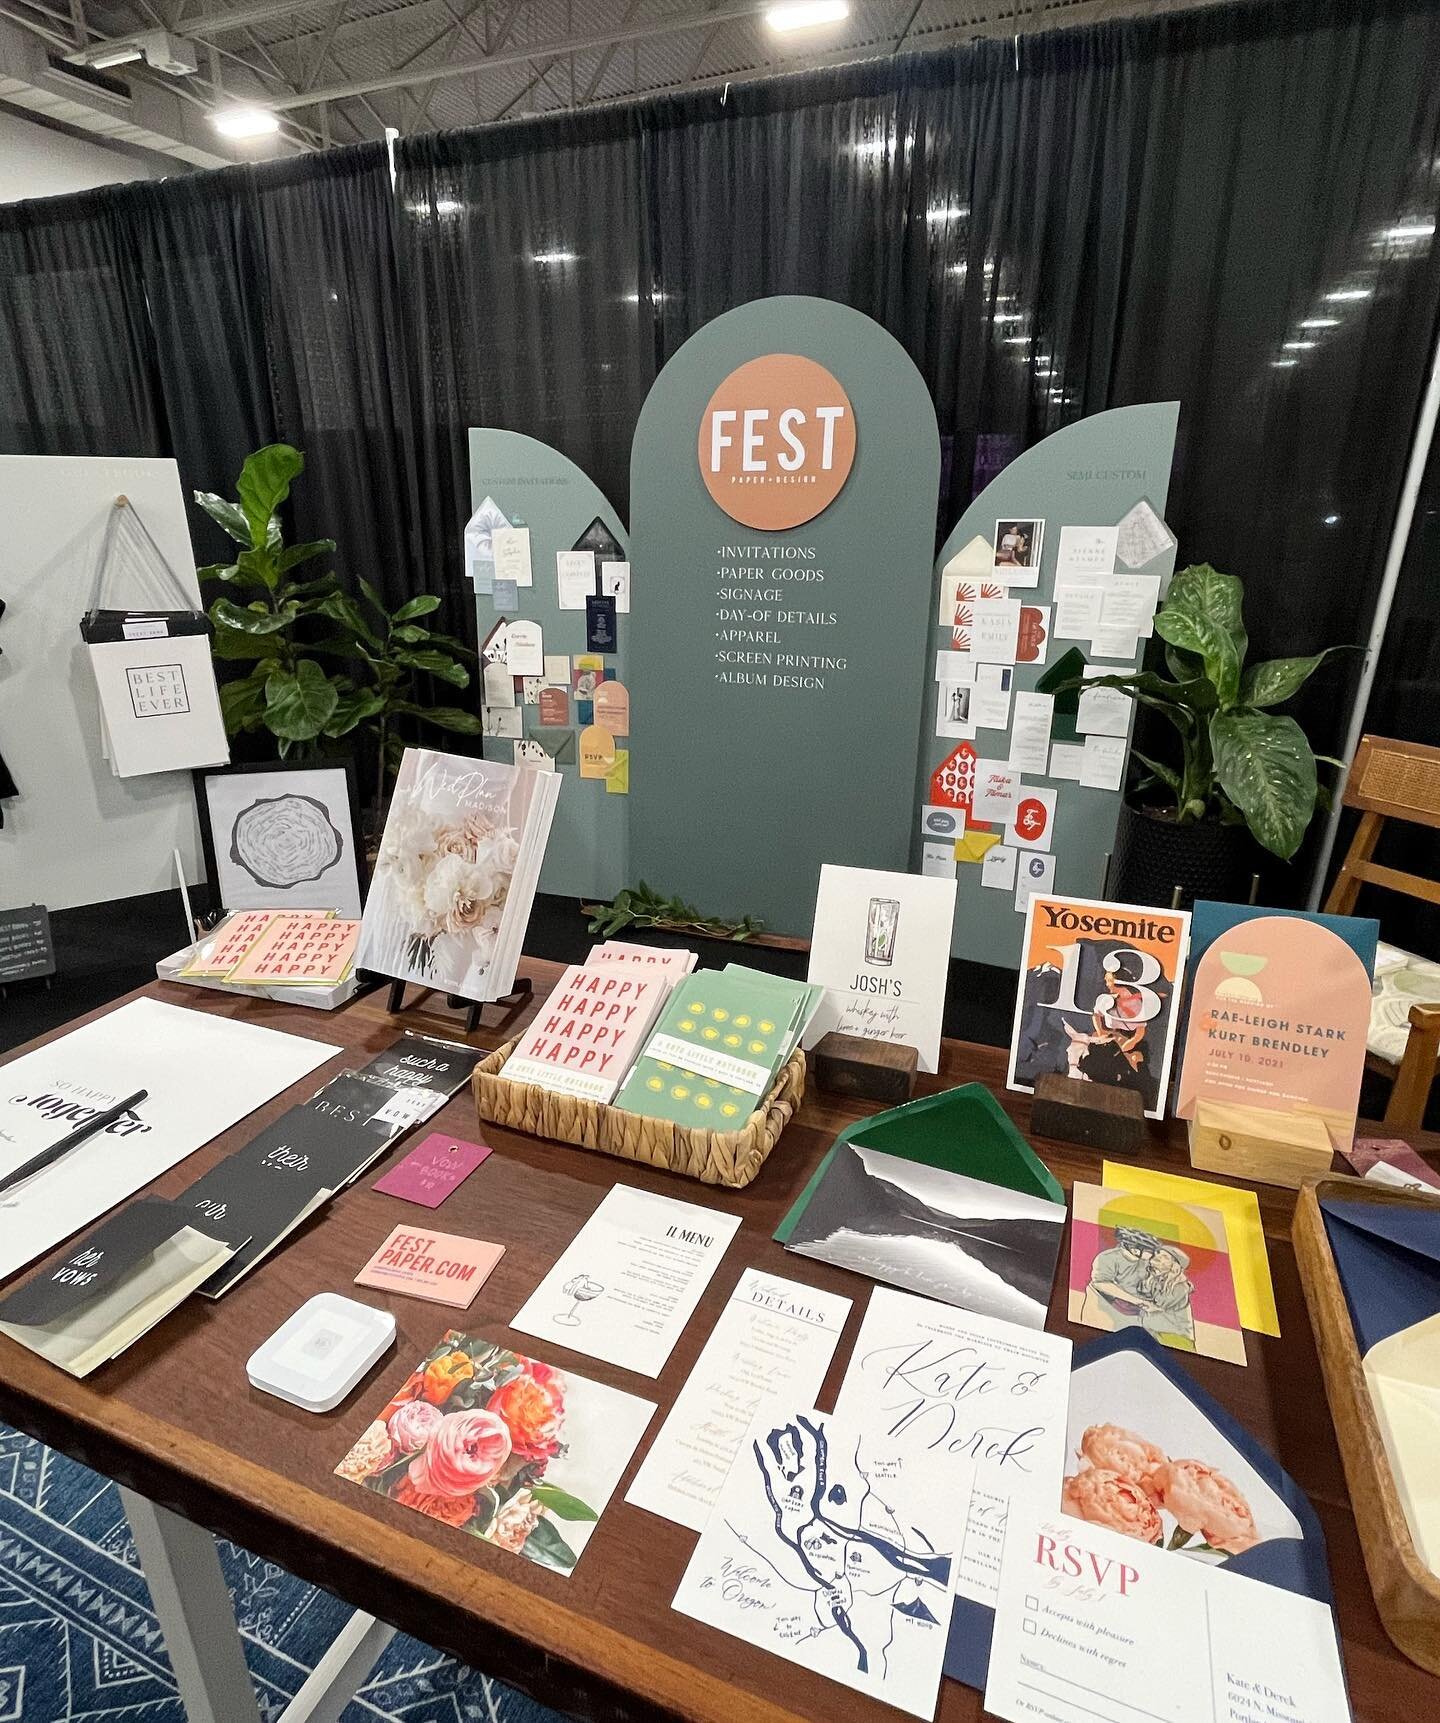 🥳Party at booth 906!🥳
Find our fun table at the Wedding Show here in Madison!

#weddinginspiration #wisconsinweddingplanner #madison #madisonbride #weddingdetails #fest #wedplanmadison #wedplan